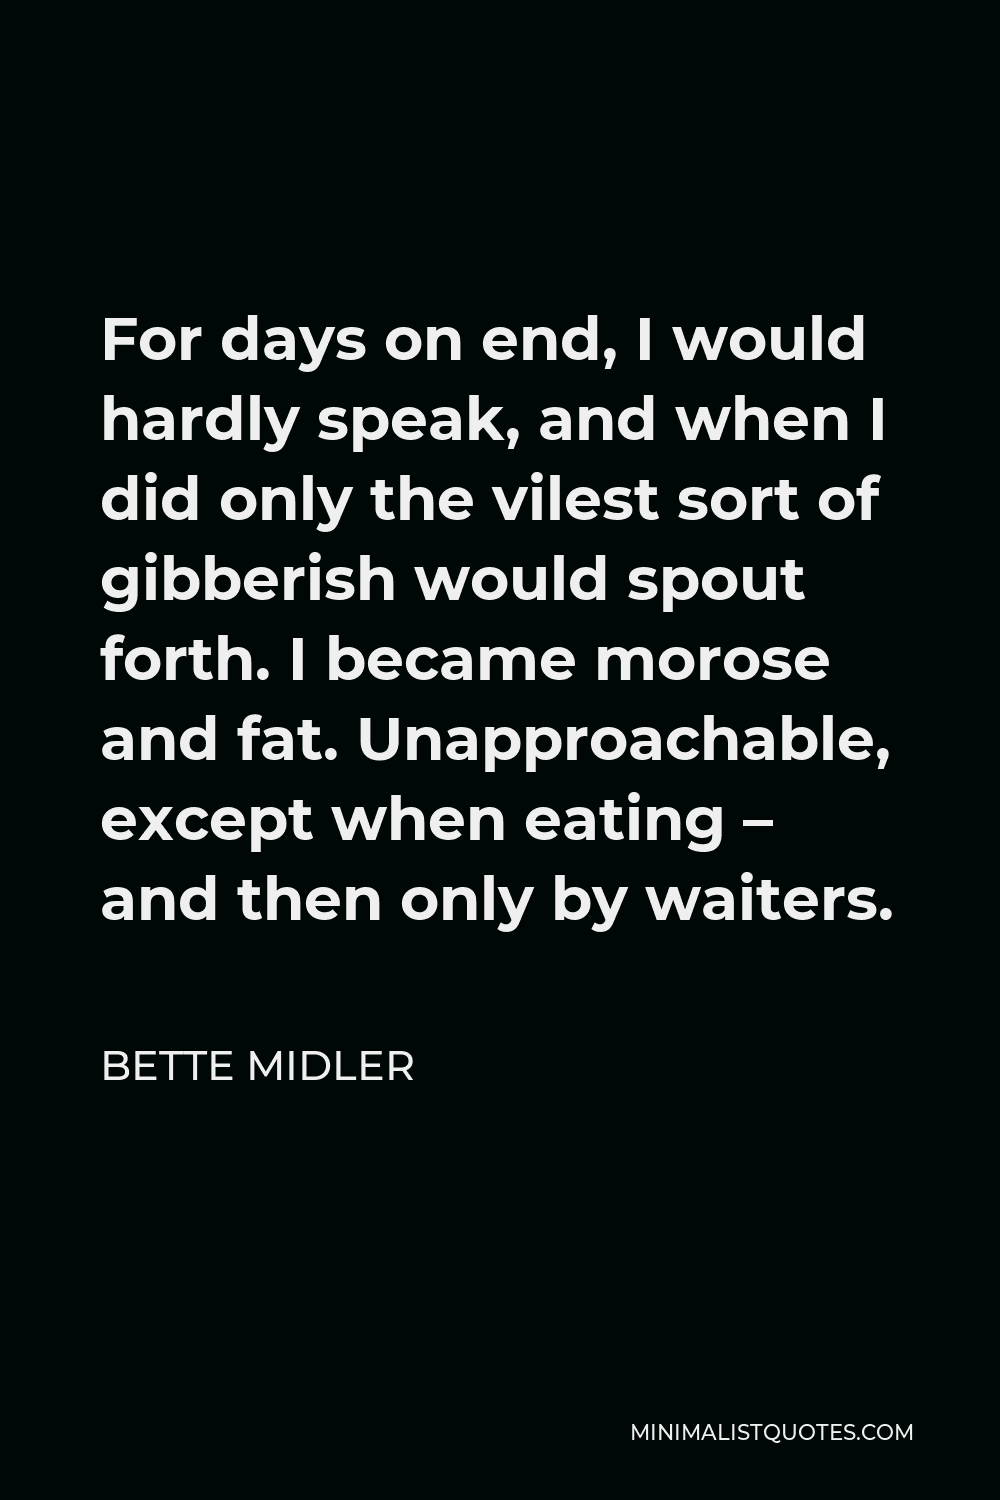 Bette Midler Quote - For days on end, I would hardly speak, and when I did only the vilest sort of gibberish would spout forth. I became morose and fat. Unapproachable, except when eating – and then only by waiters.